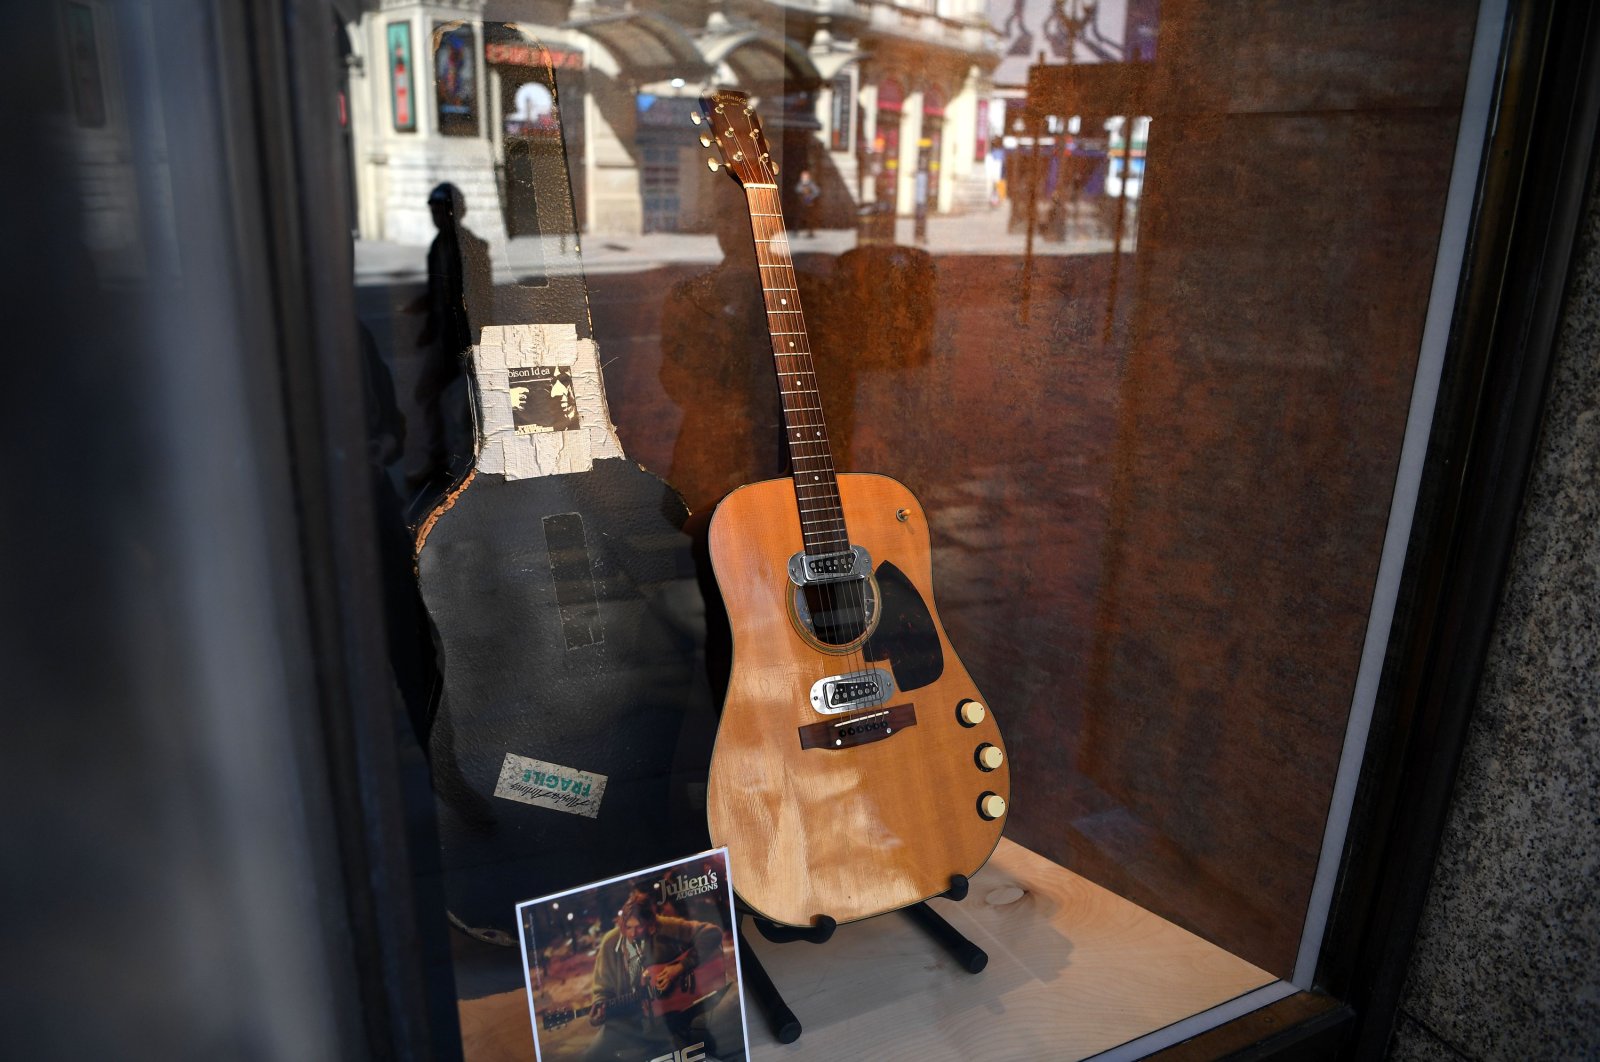 The guitar used by musician Kurt Cobain during Nirvana's famous MTV Unplugged in New York concert in 1993, is displayed in the window of the Hard Rock Cafe Piccadilly Circus in central London, England, May 15, 2020. (AFP Photo)